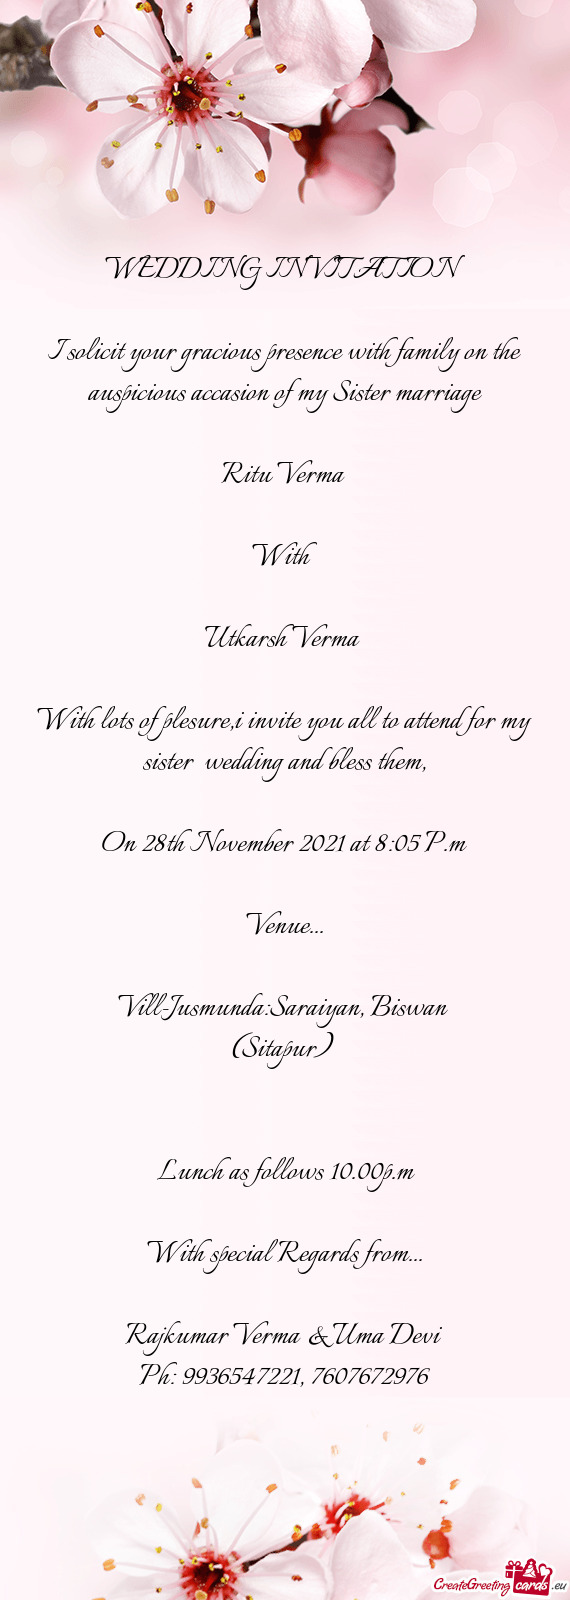 With lots of plesure,i invite you all to attend for my sister wedding and bless them